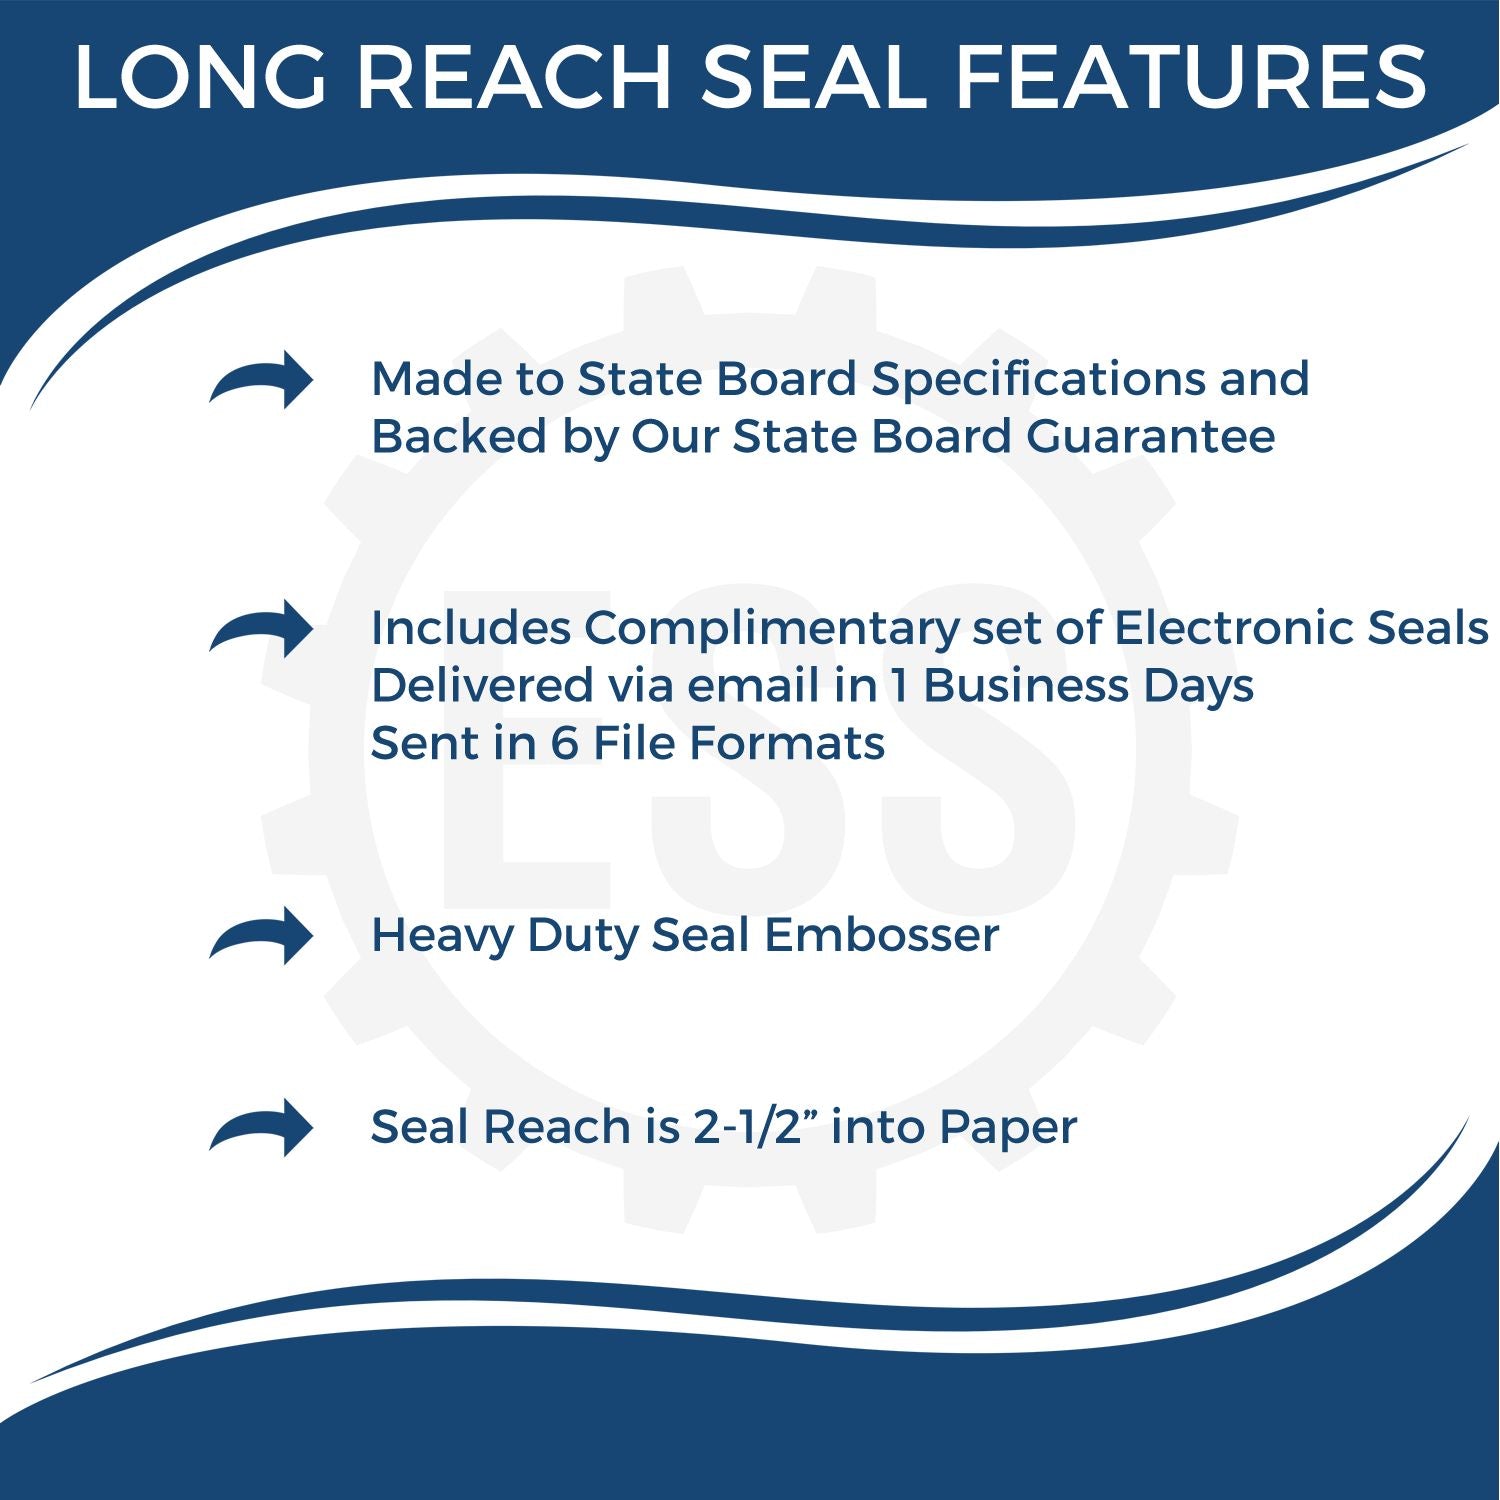 The main image for the Long Reach Arkansas PE Seal depicting a sample of the imprint and electronic files